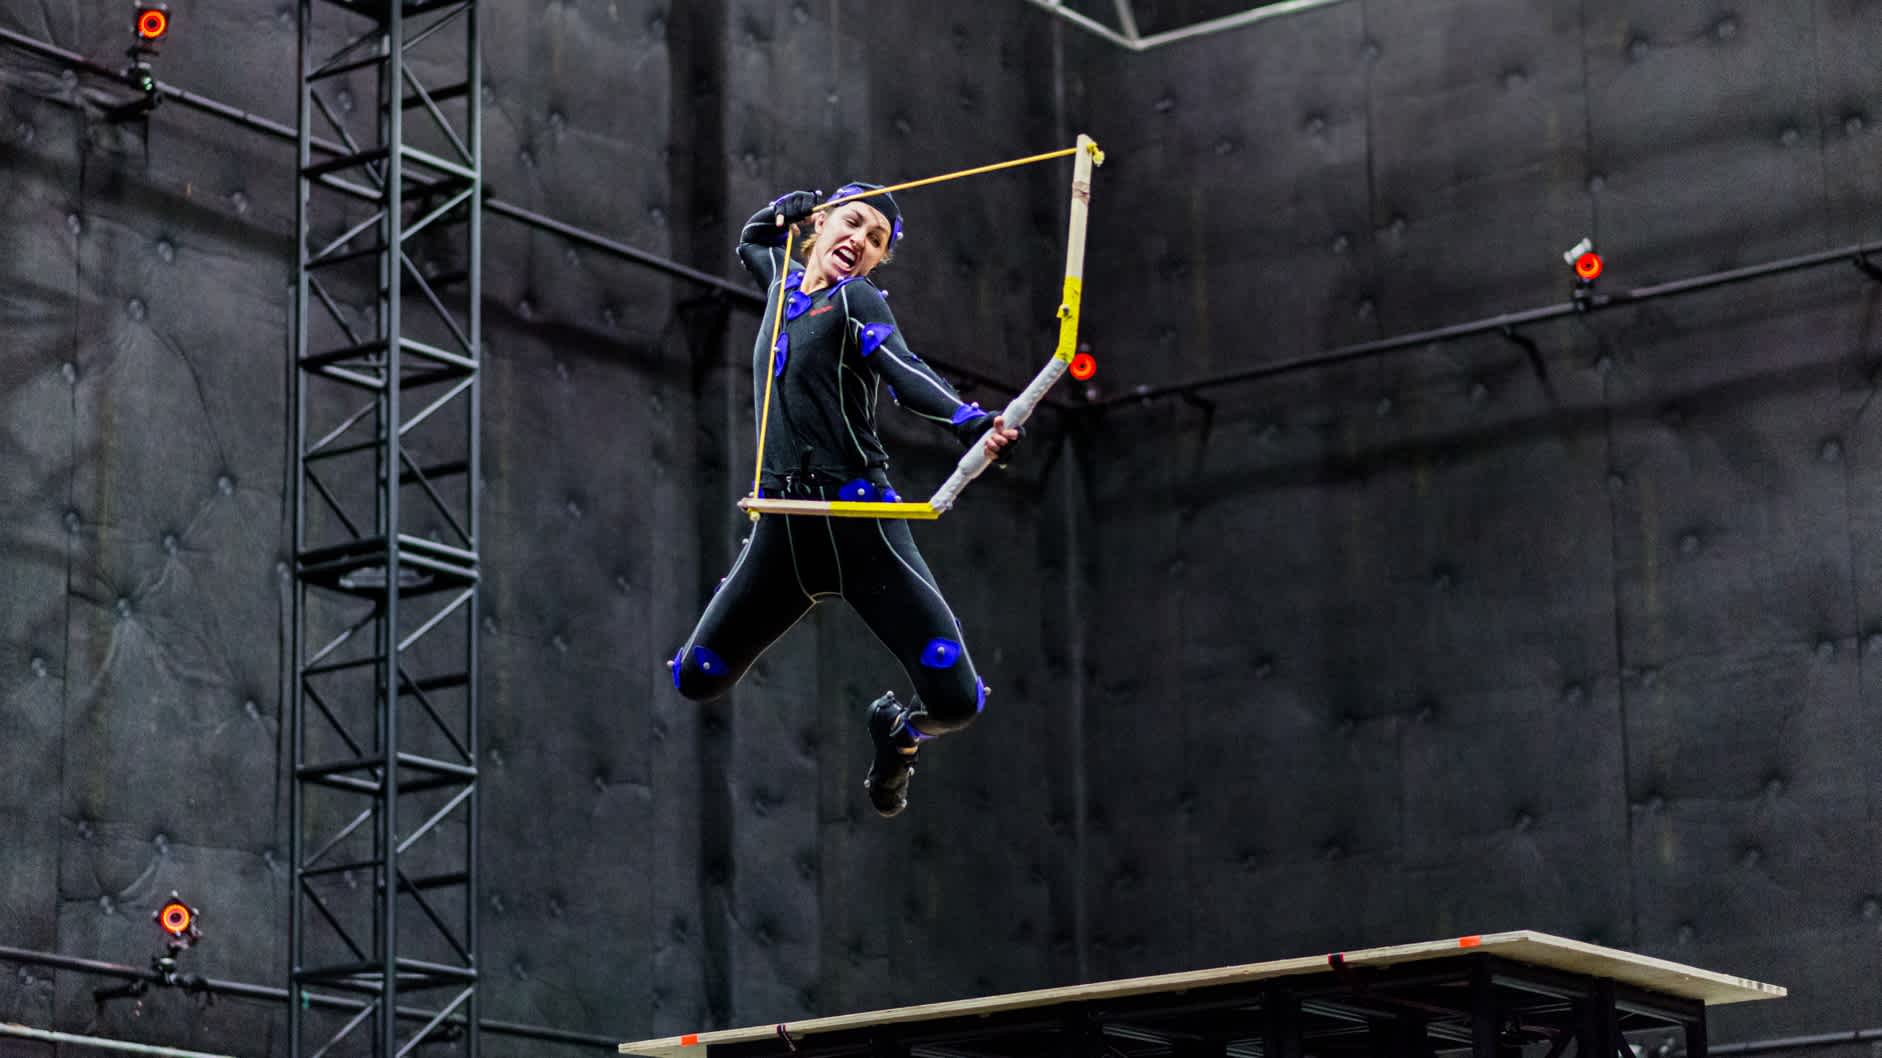 Stunt woman, wearing a motion capture suit, jumping in the air with a bow arrow.